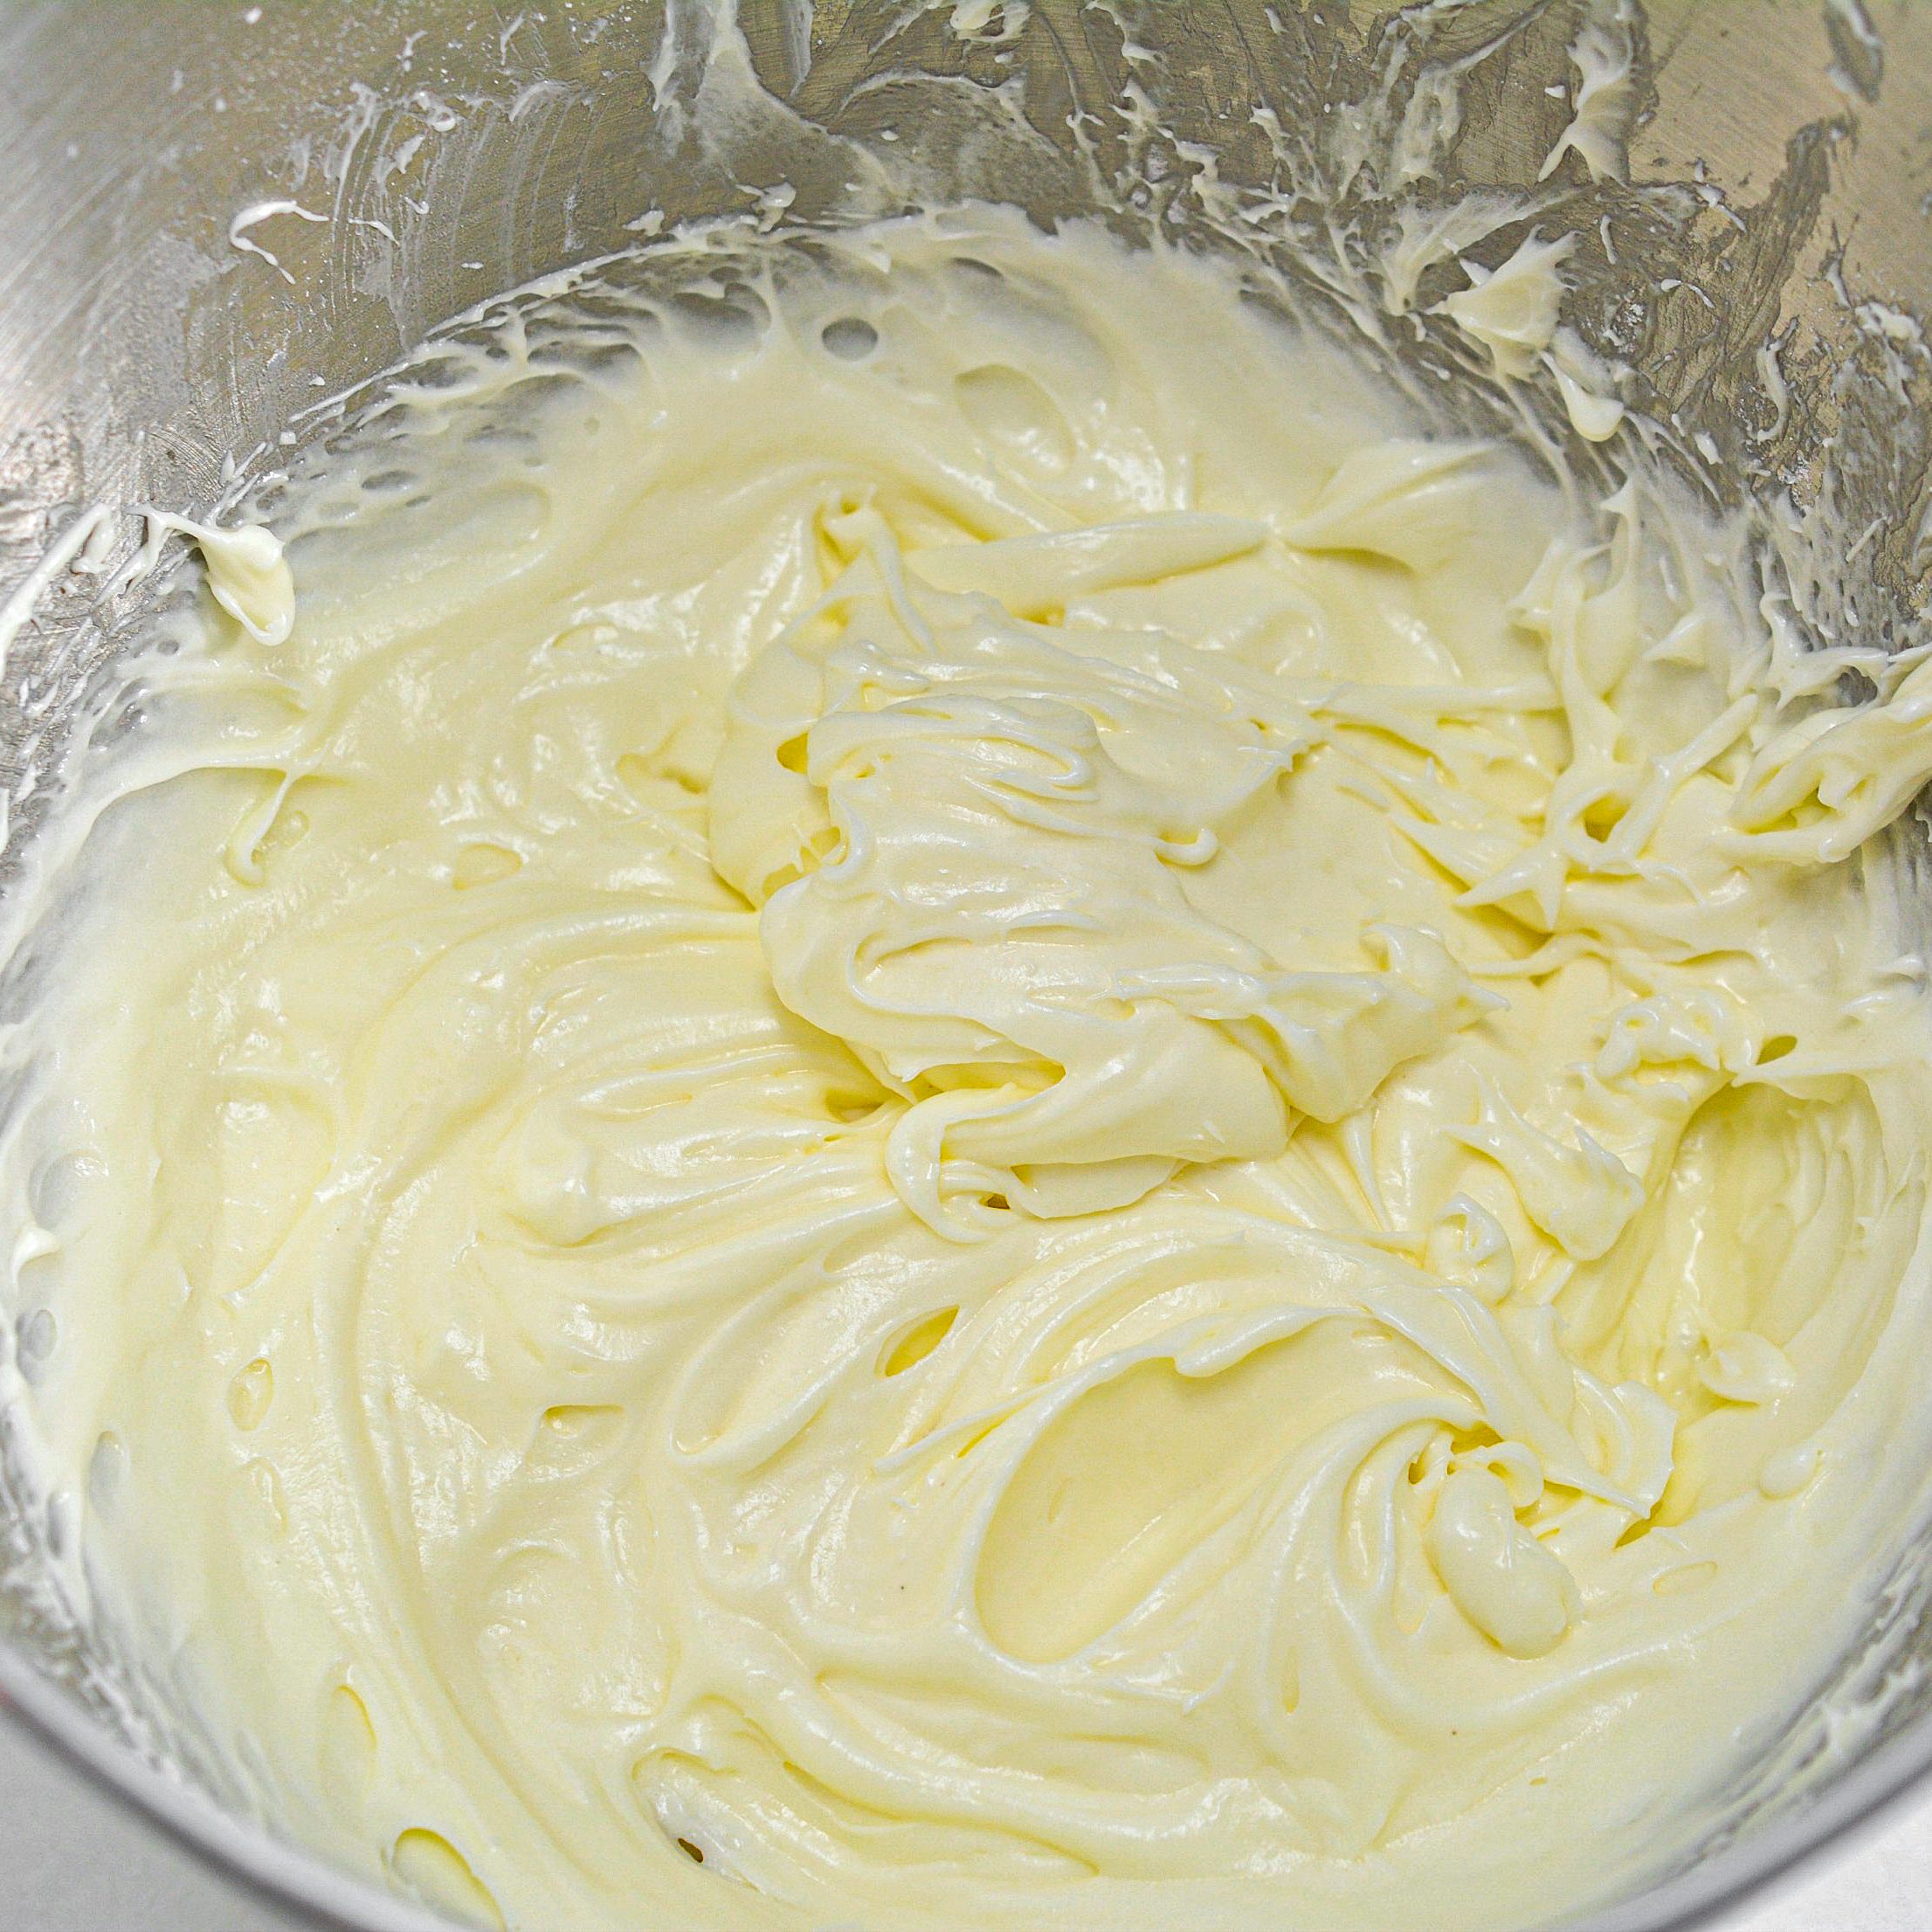 Mix in the powdered sugar to the cream cheese mixture a little at a time until it is all well combined.